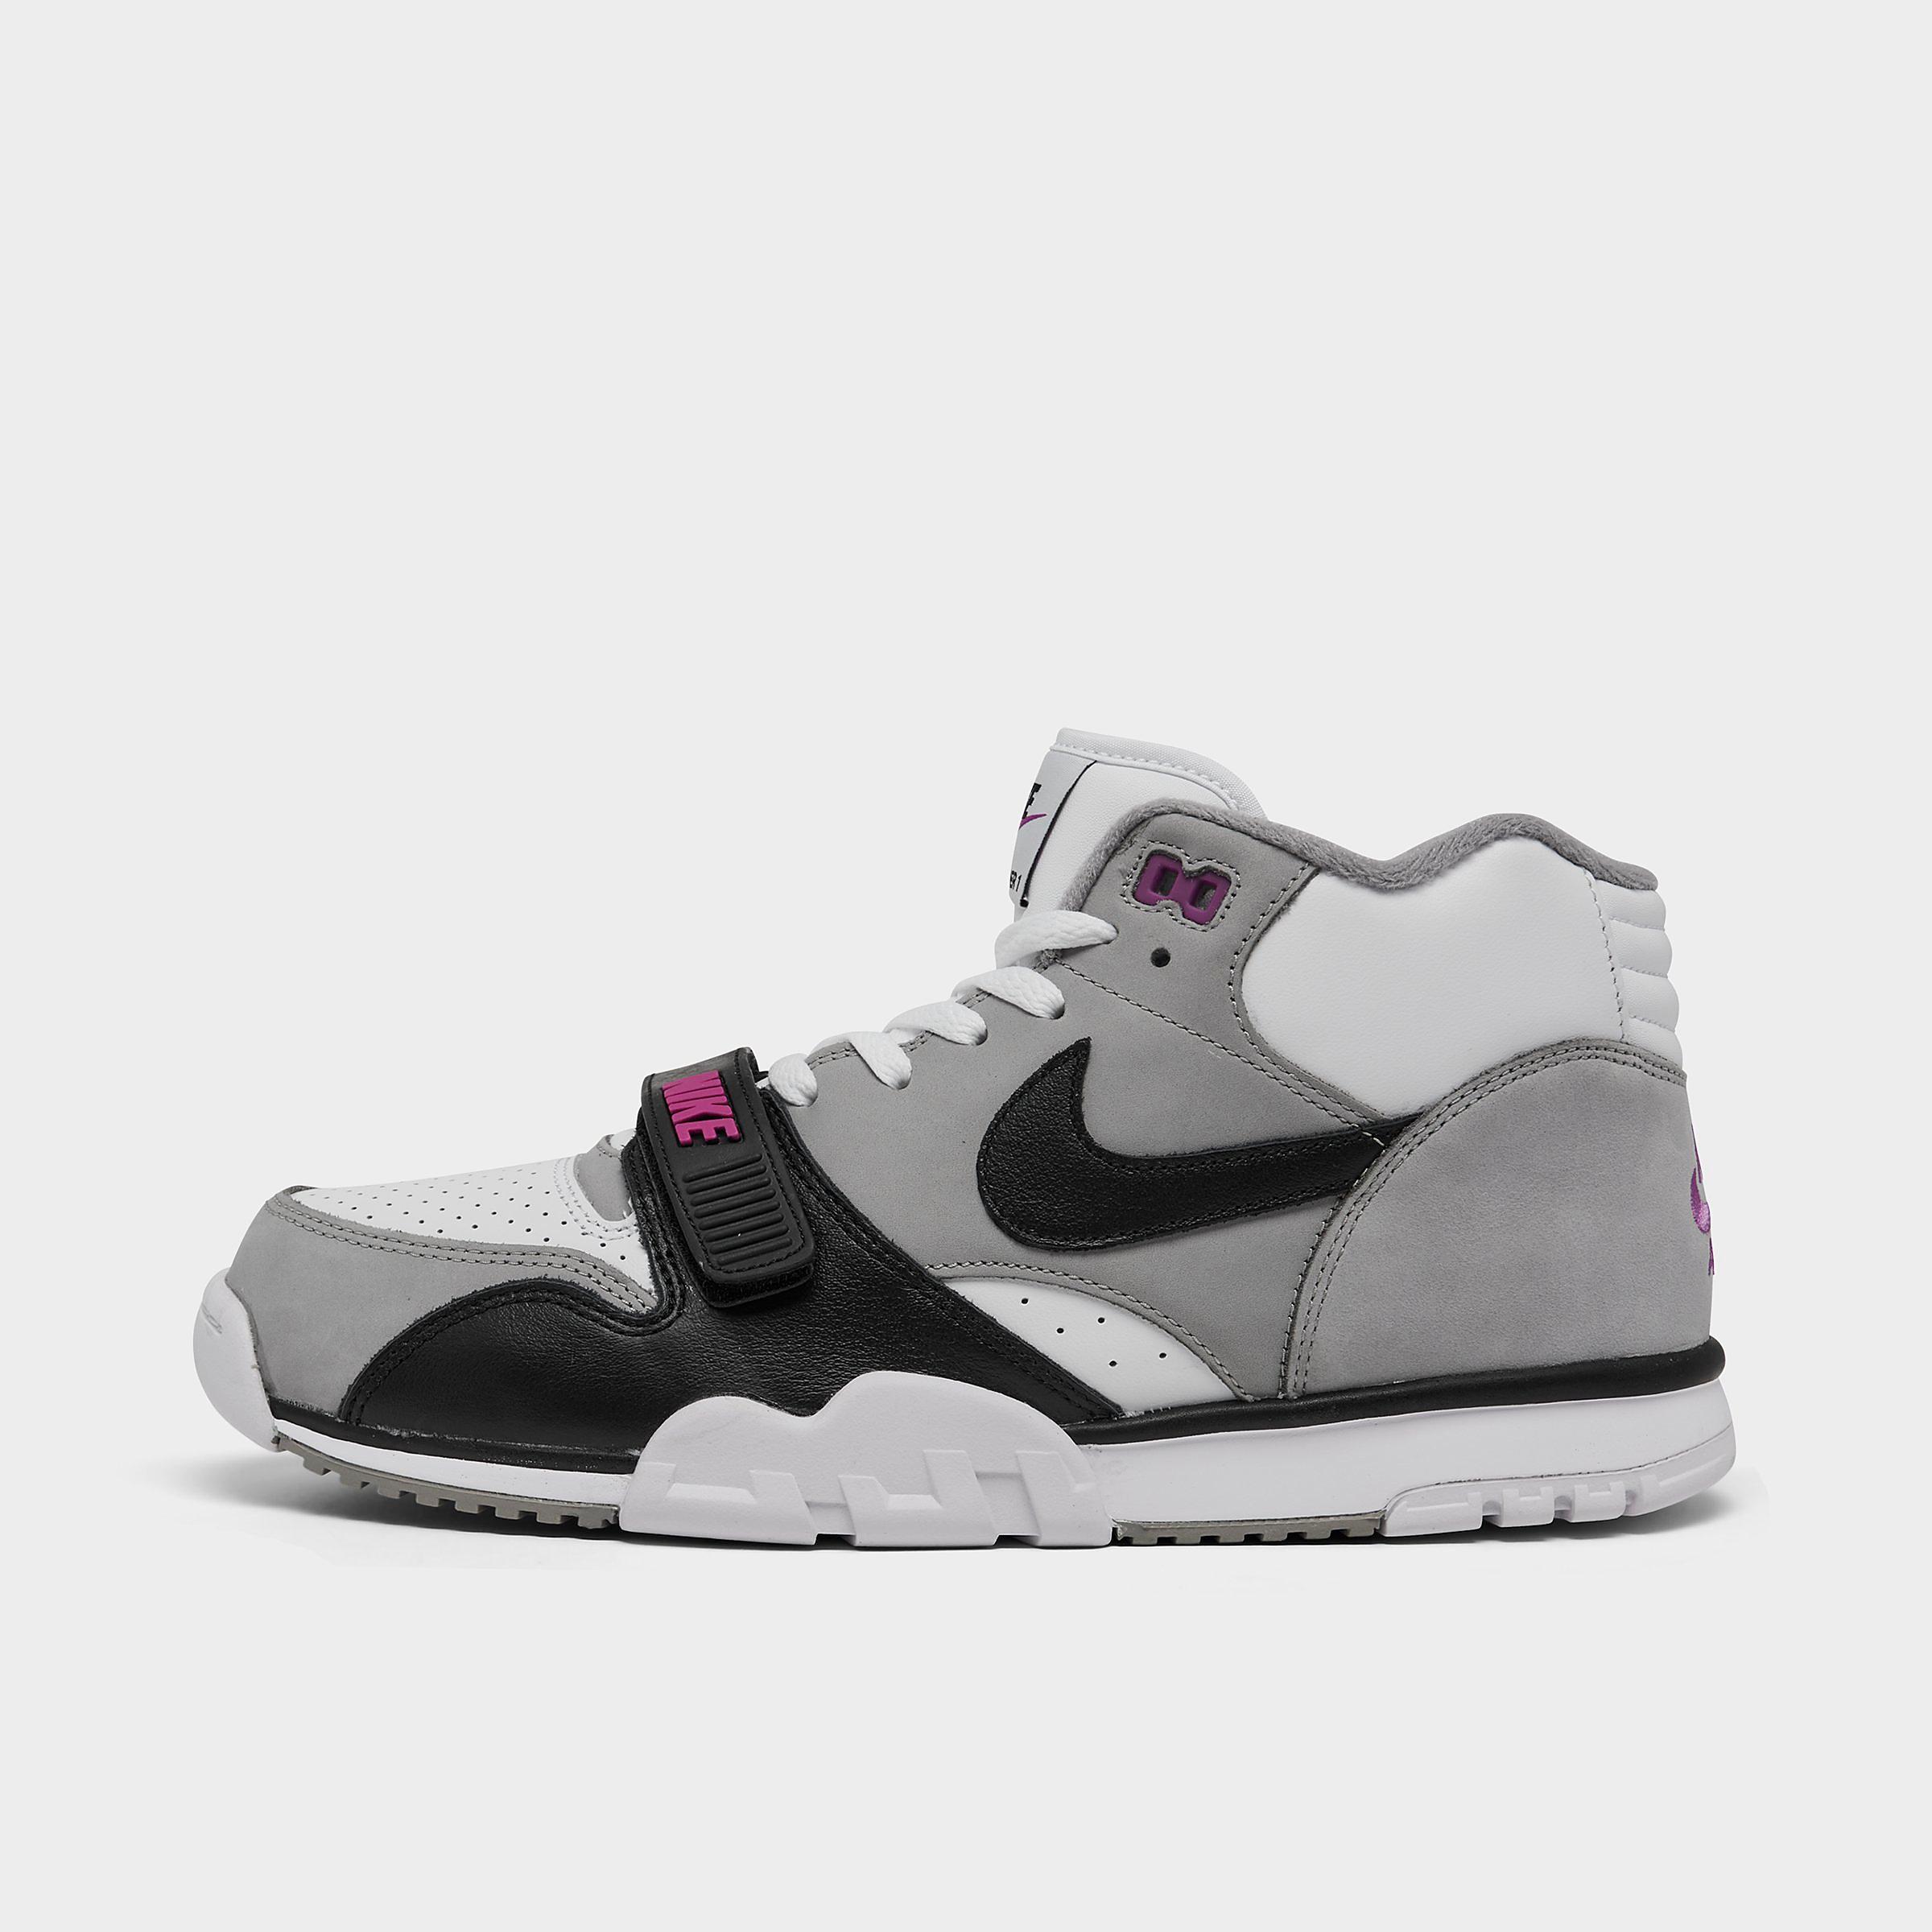 Mens Nike Air Trainer 1 Casual Shoes